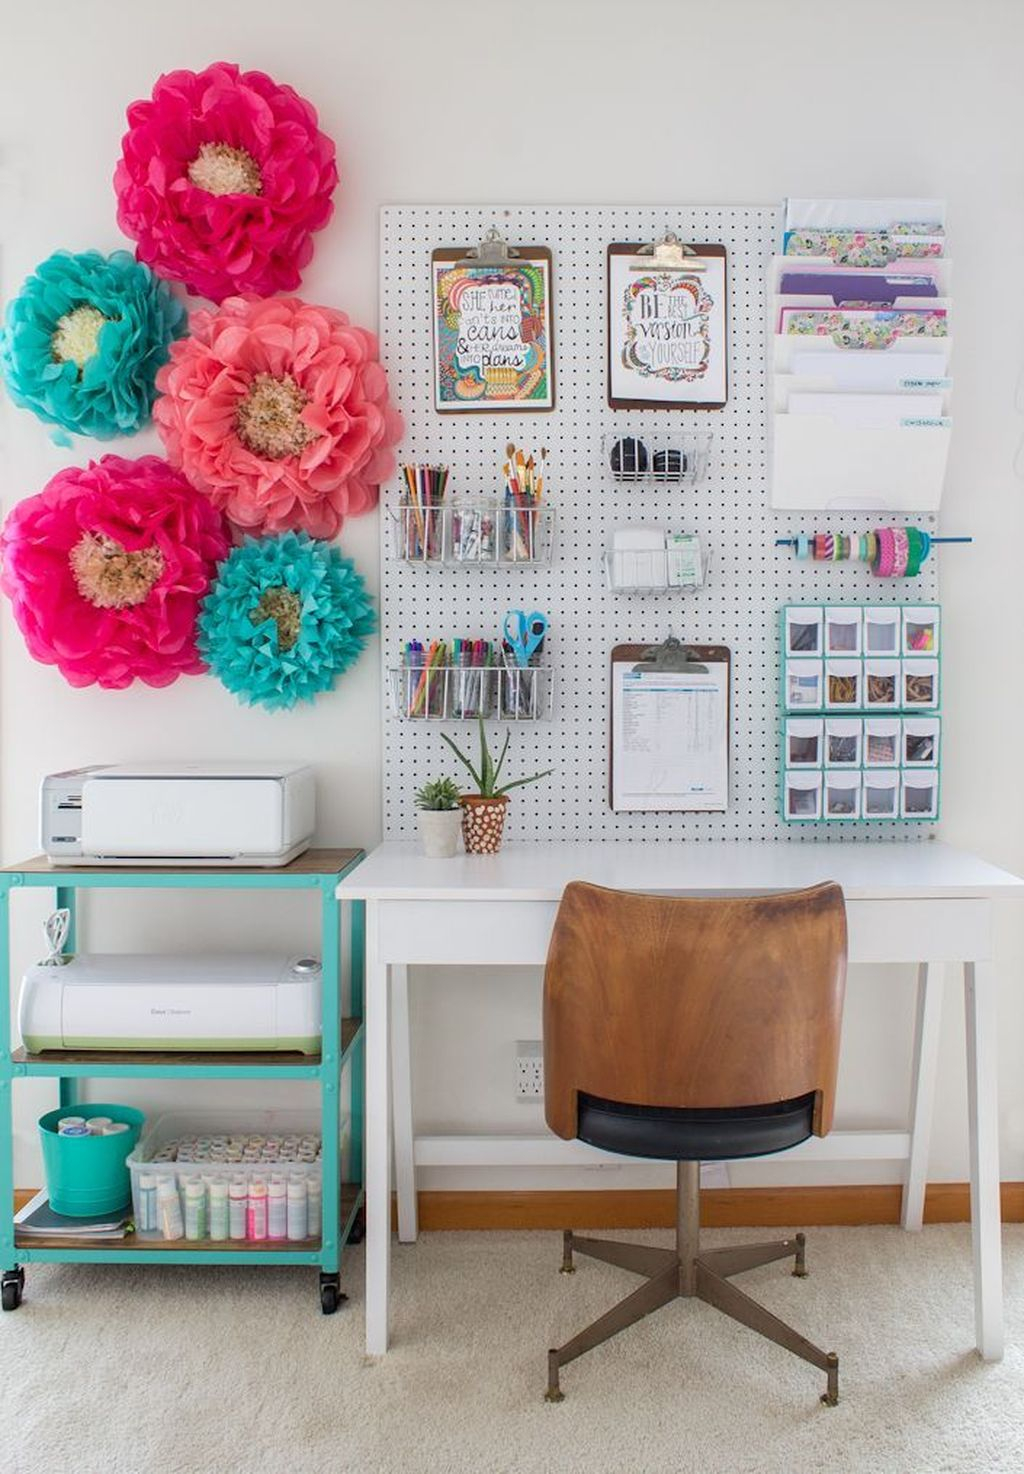 Diy Awesome Home Office Organizing Ideas22